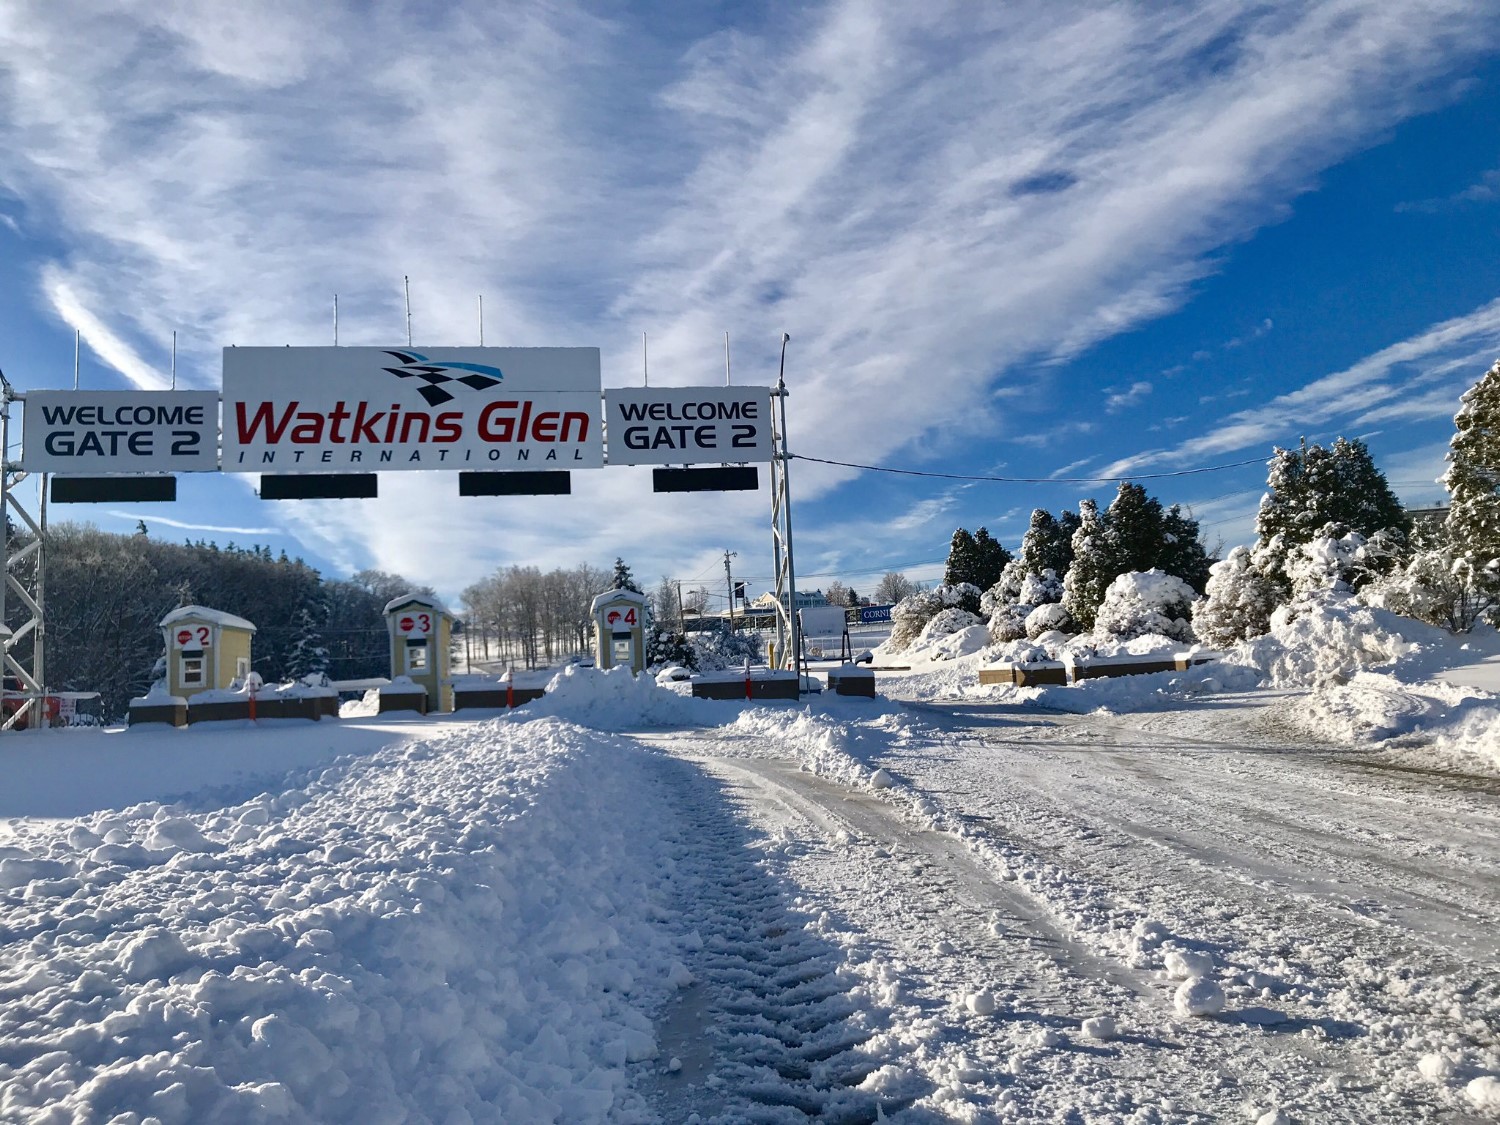 It's pretty white in Watkins Glen this time of year